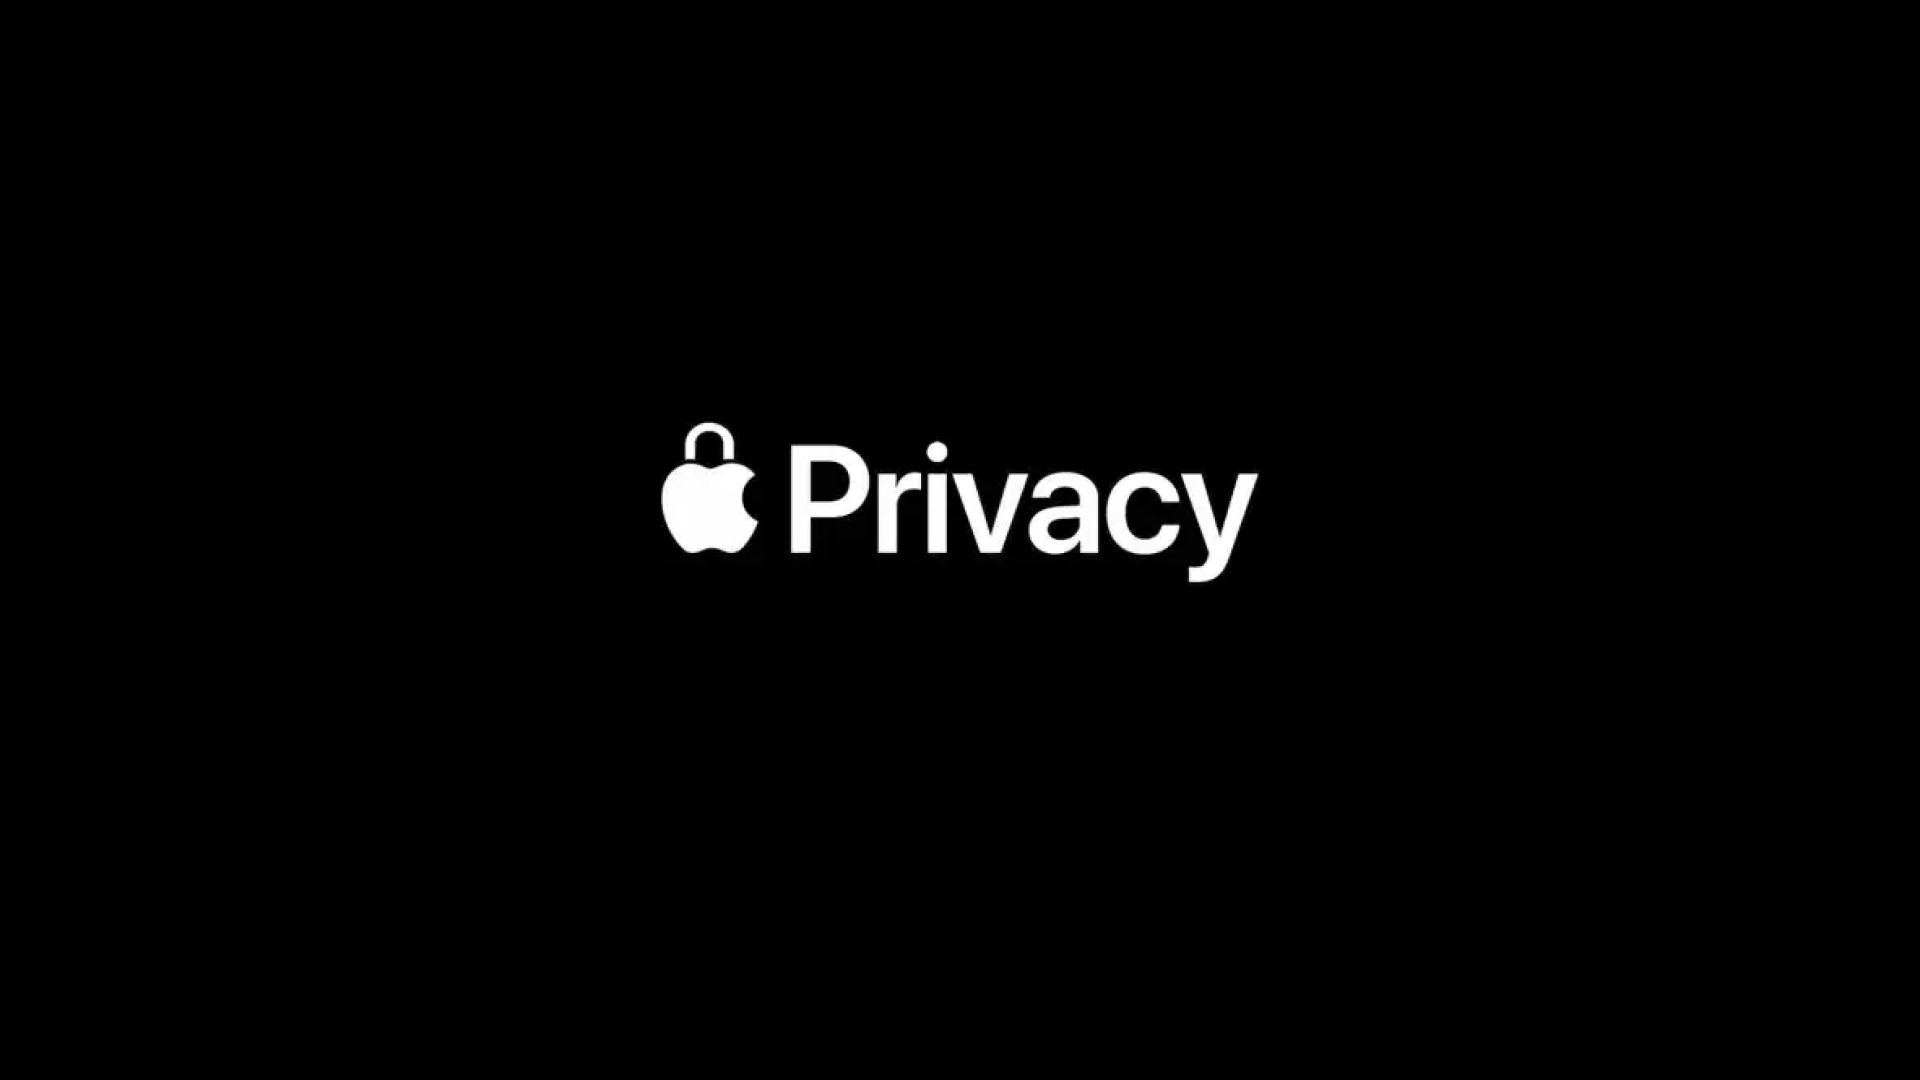 Apple Selling Privacy?